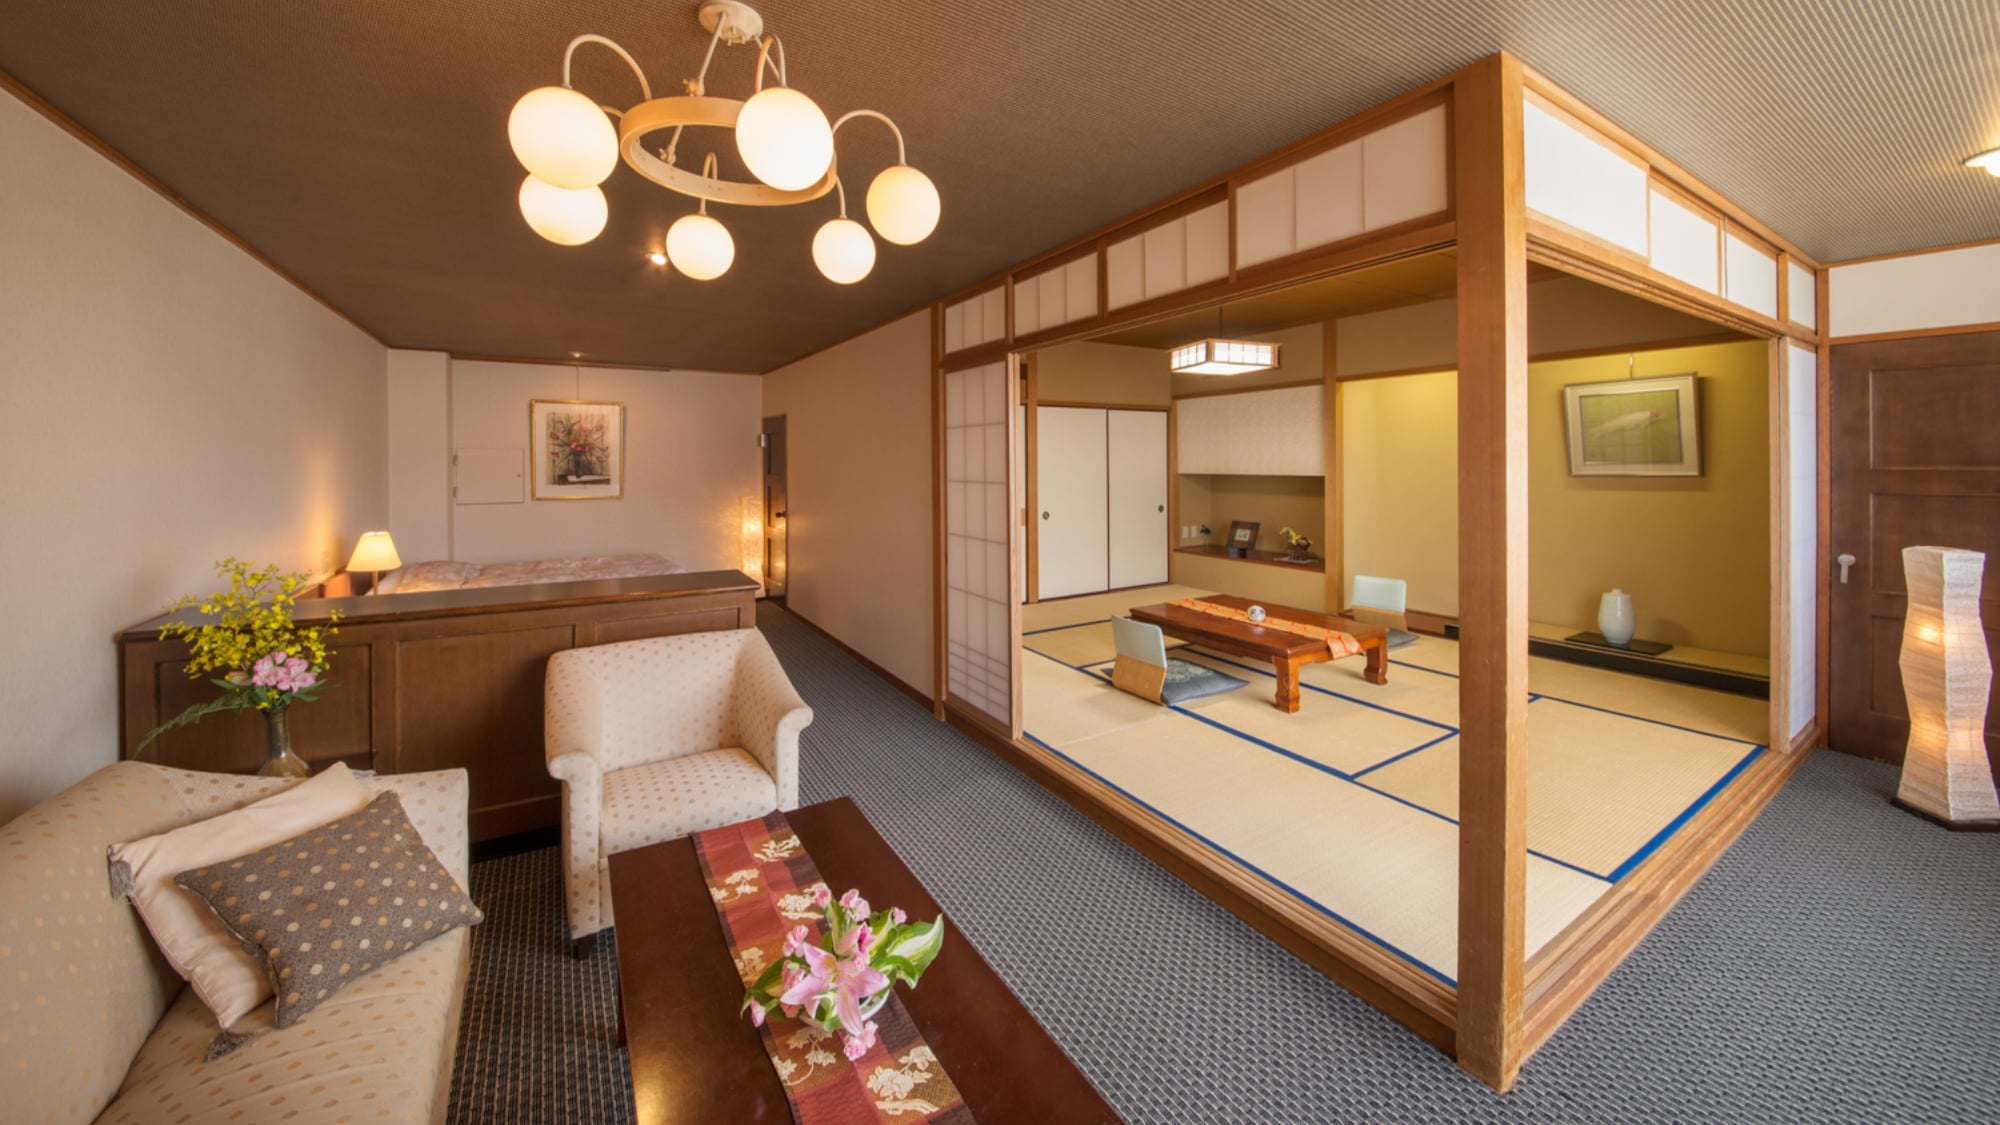 An example of a Japanese-Western style room